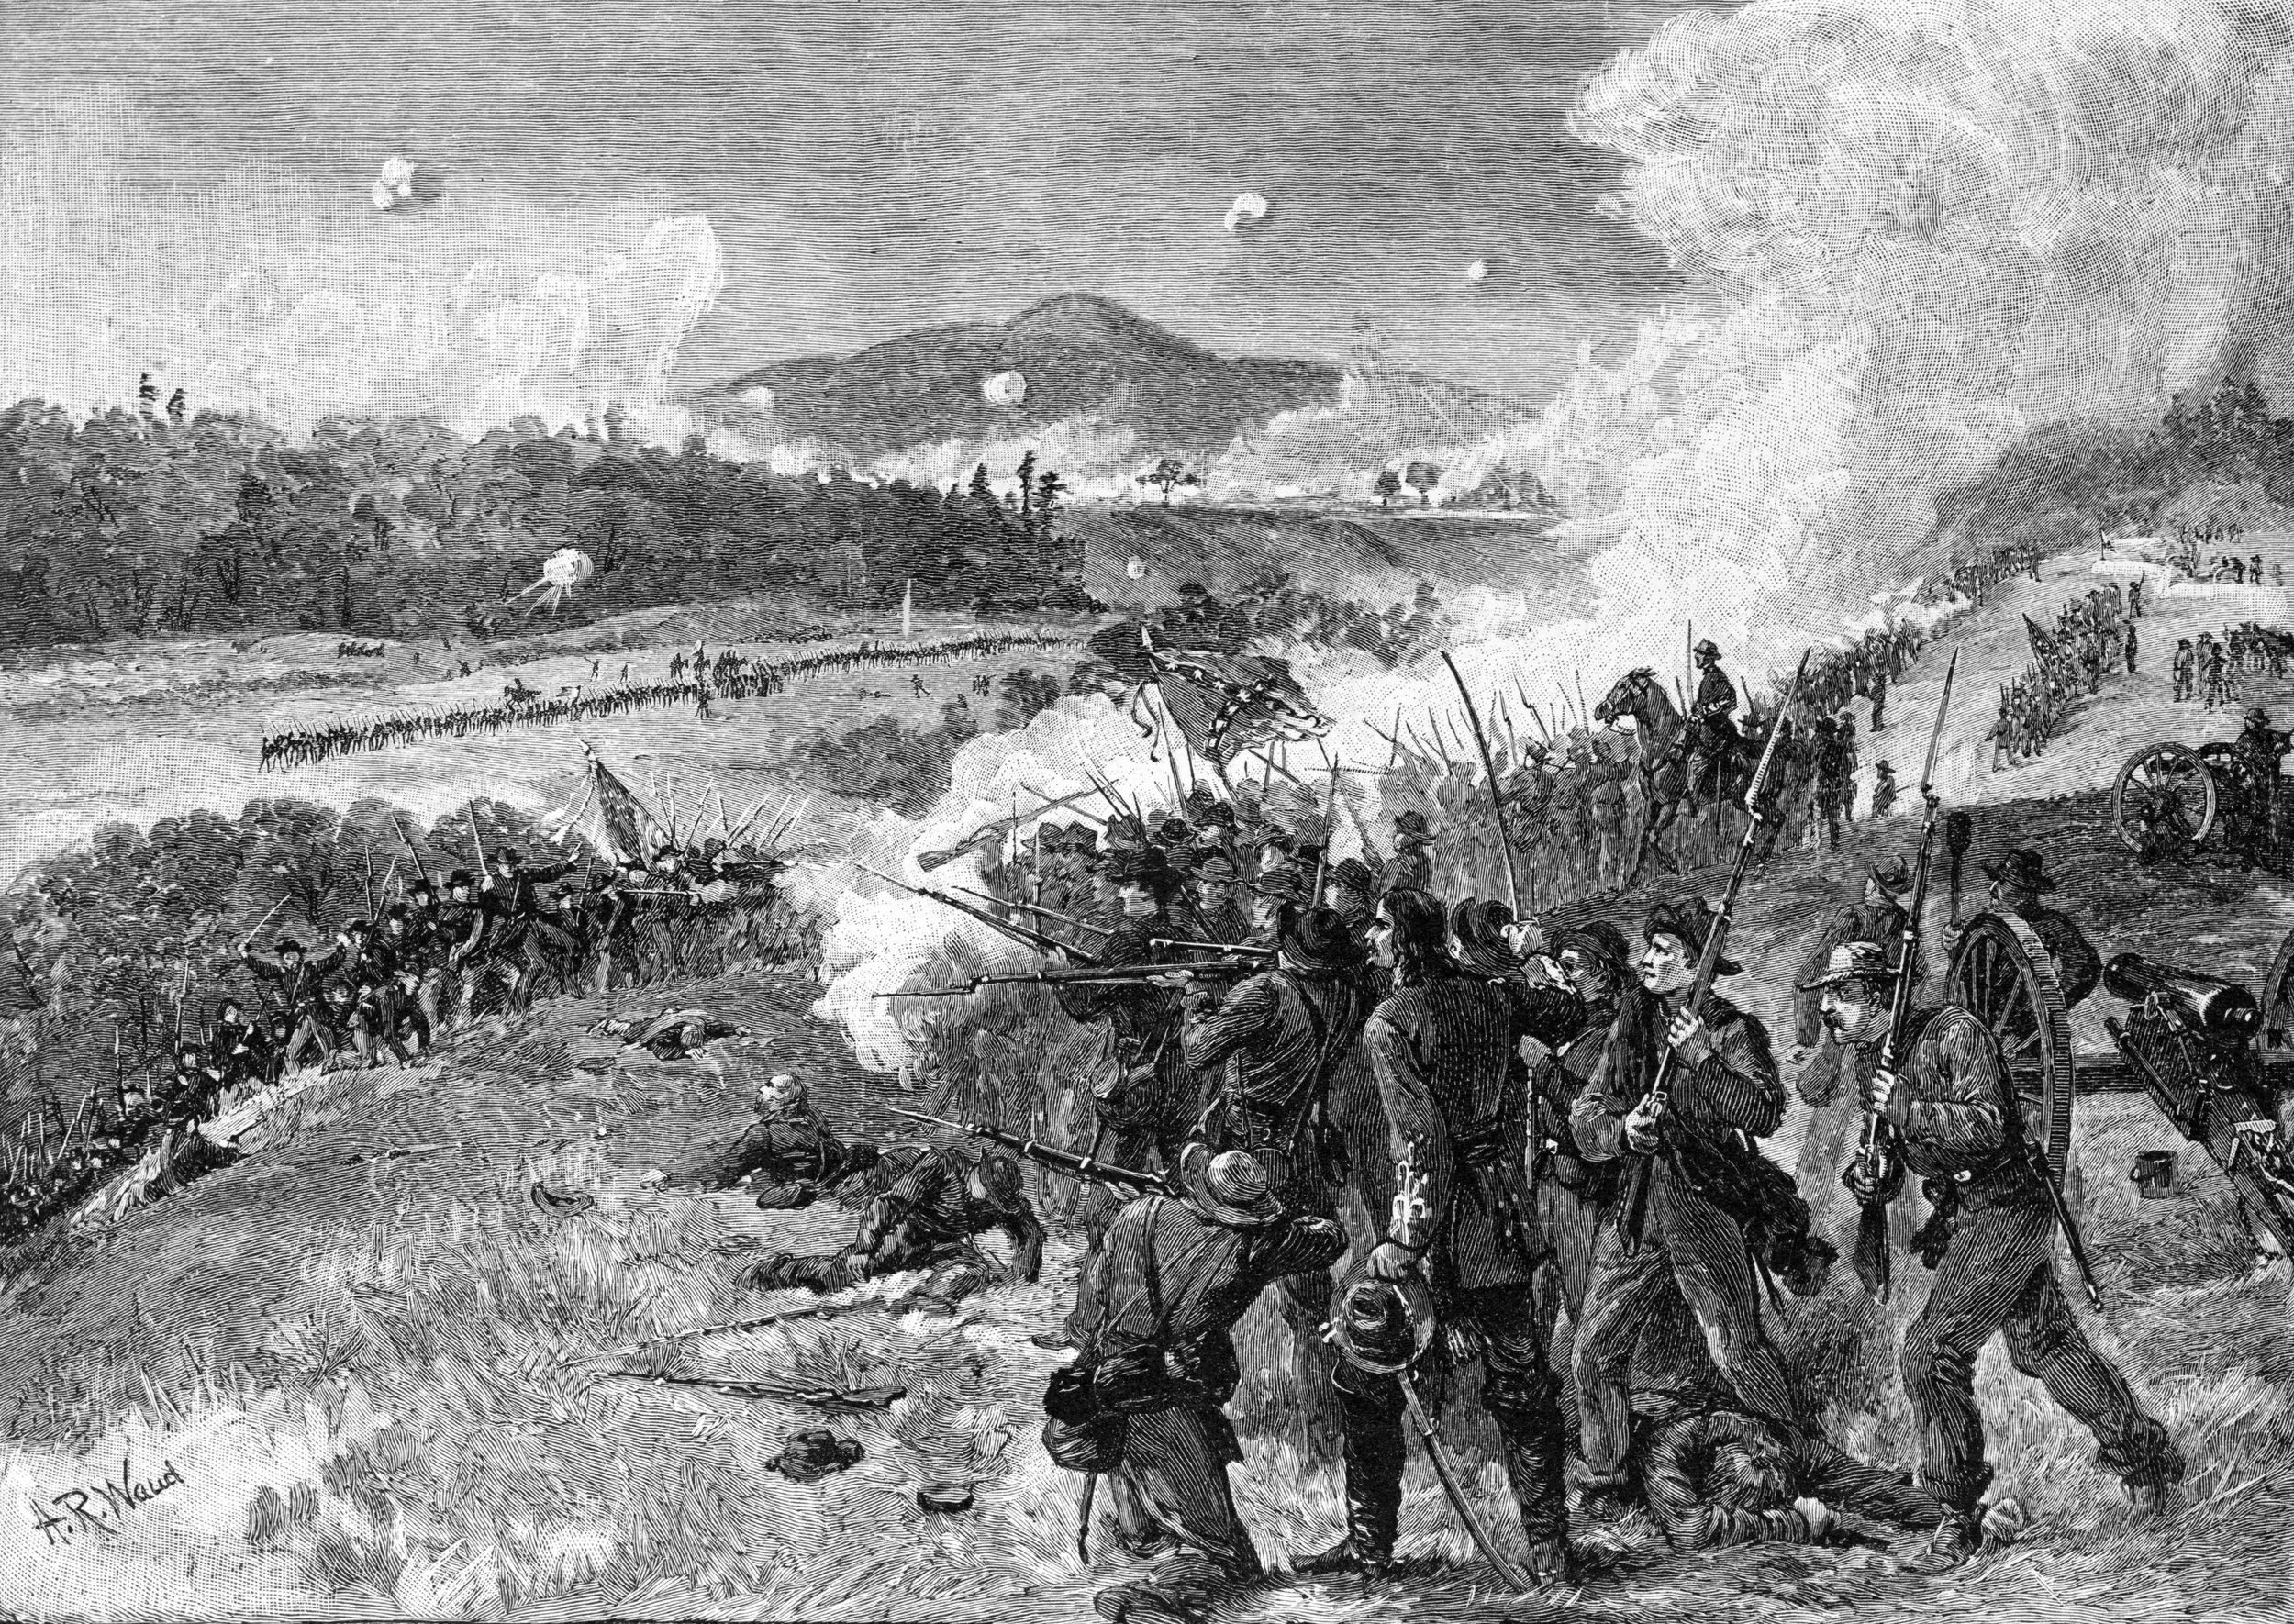 Confederates hold the high ground at Pickett’s Mill, forcing Union troops to climb literally toward their muzzles. Rebel artillery supports the merciless fire. It was over in minutes.